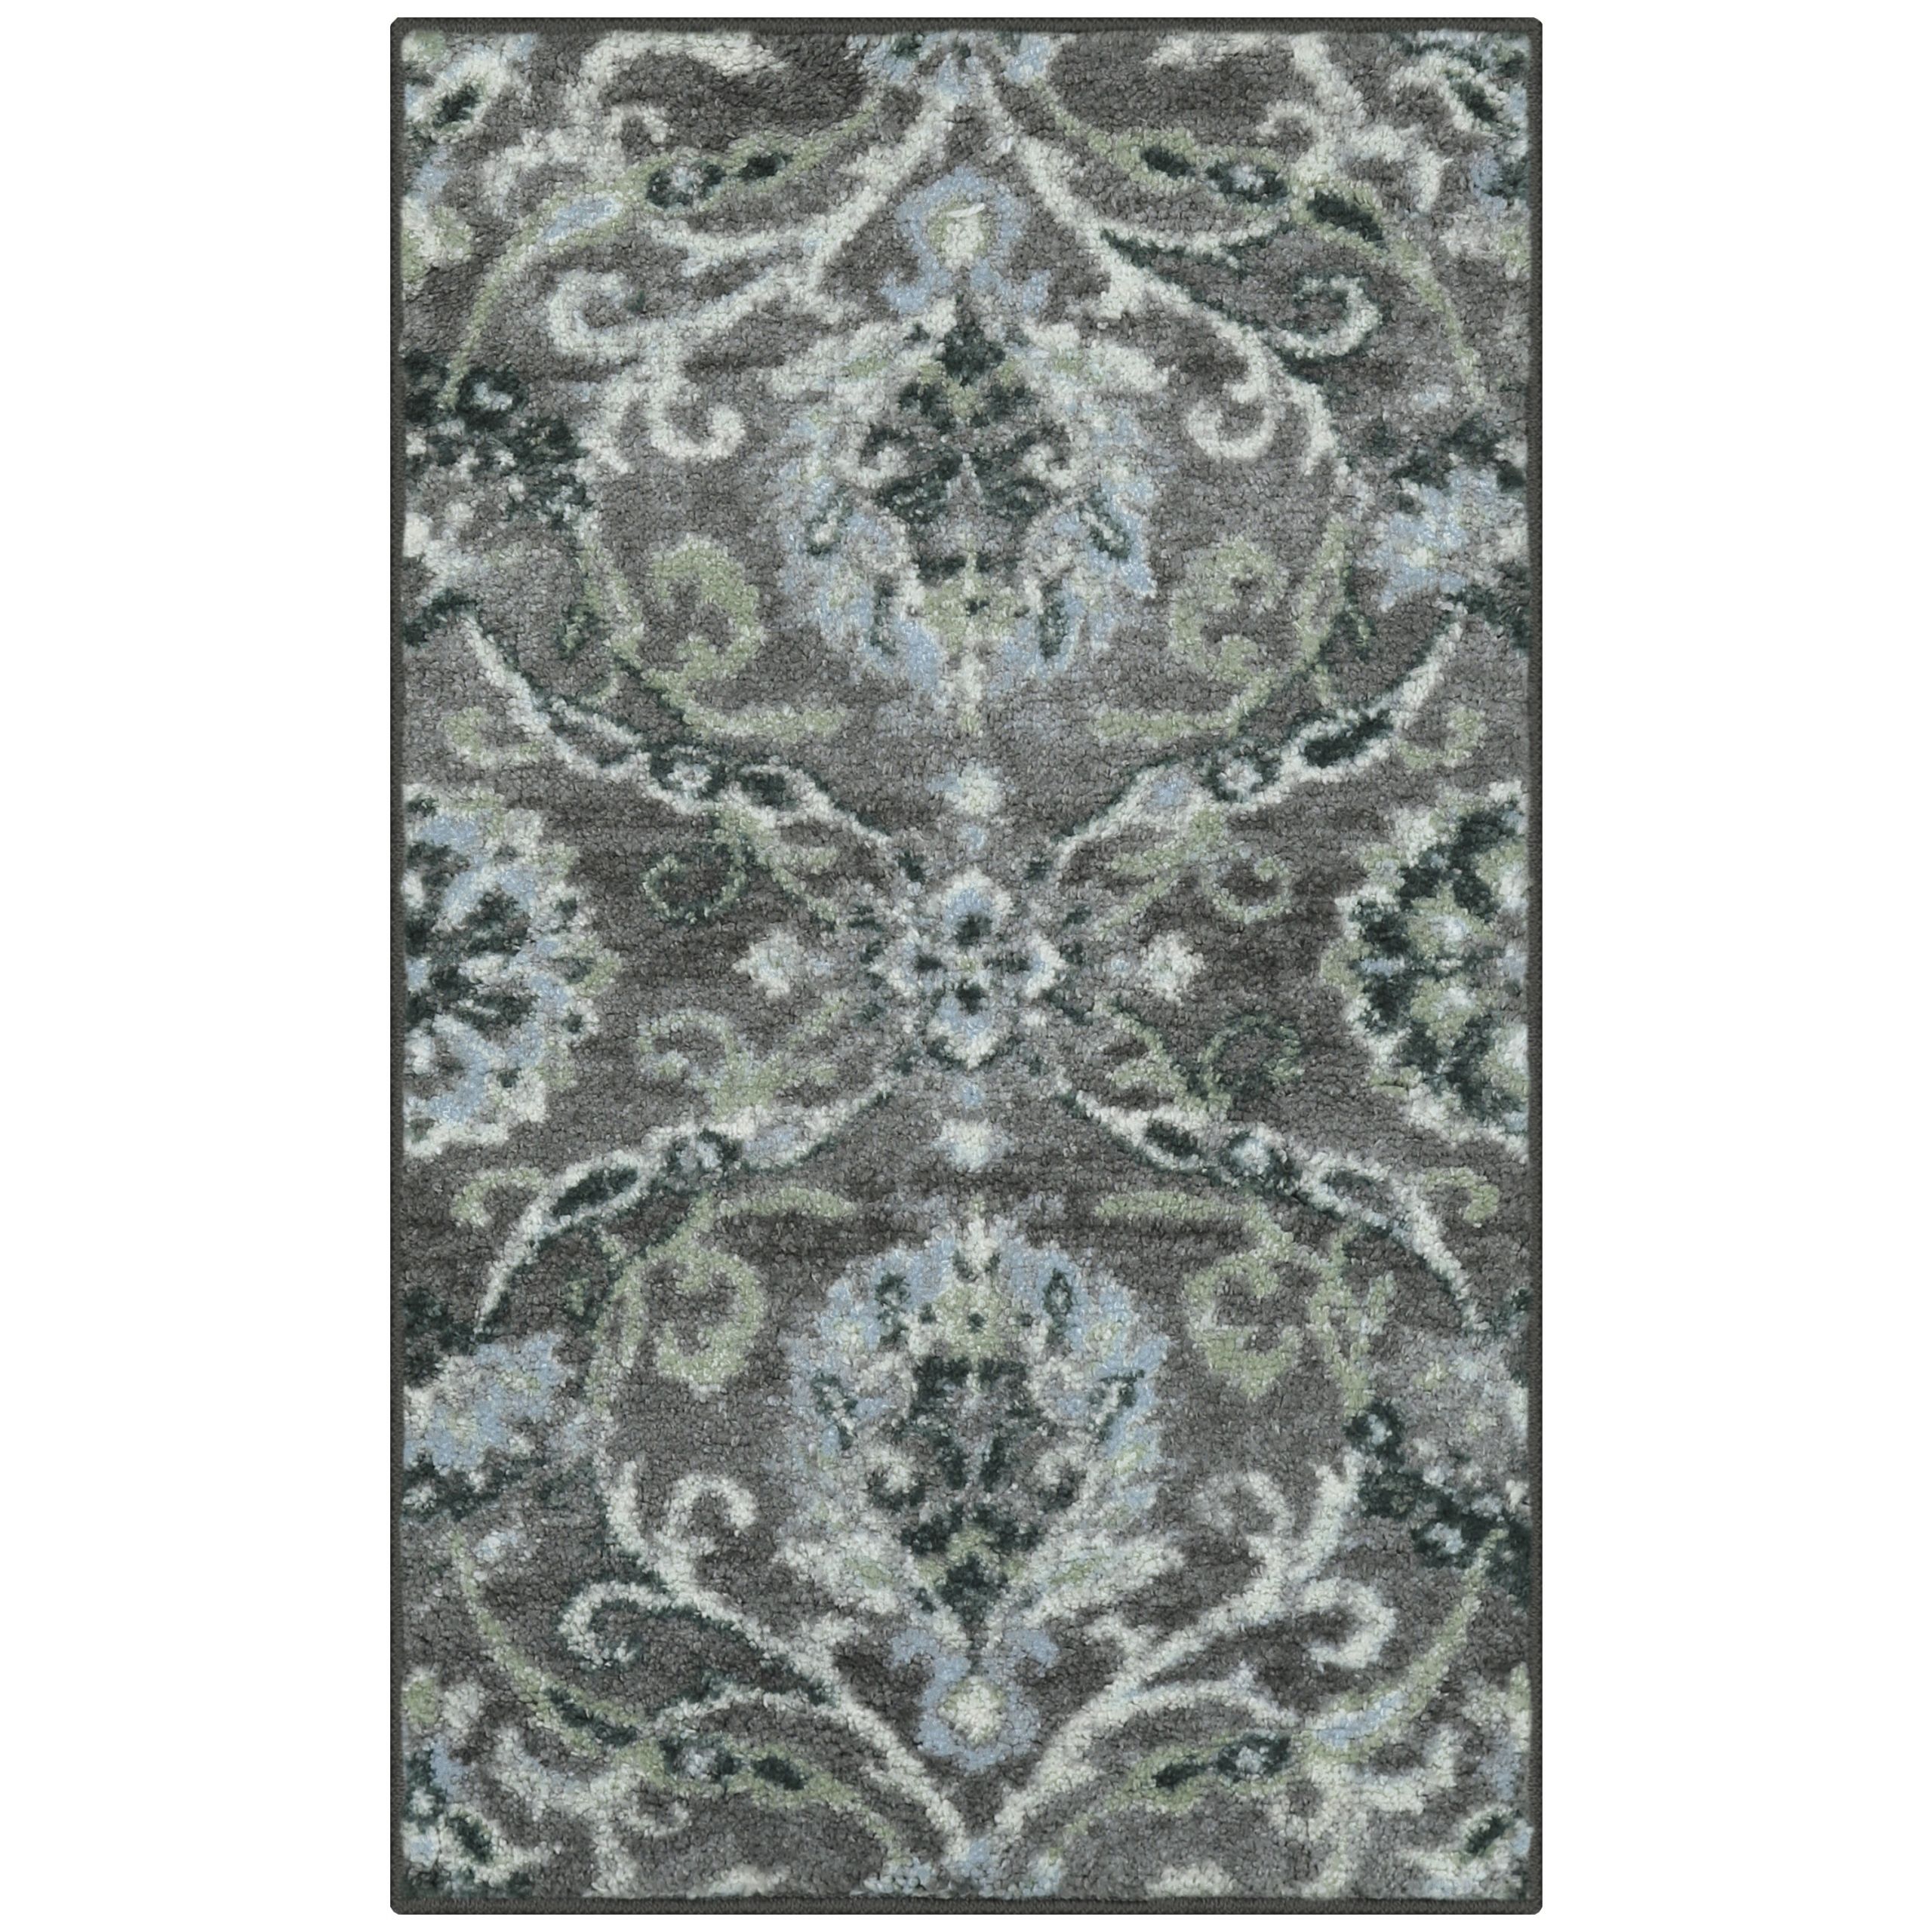 Walmart Living Room Rugs
 Better Homes and Gardens Distressed Scroll Living Room